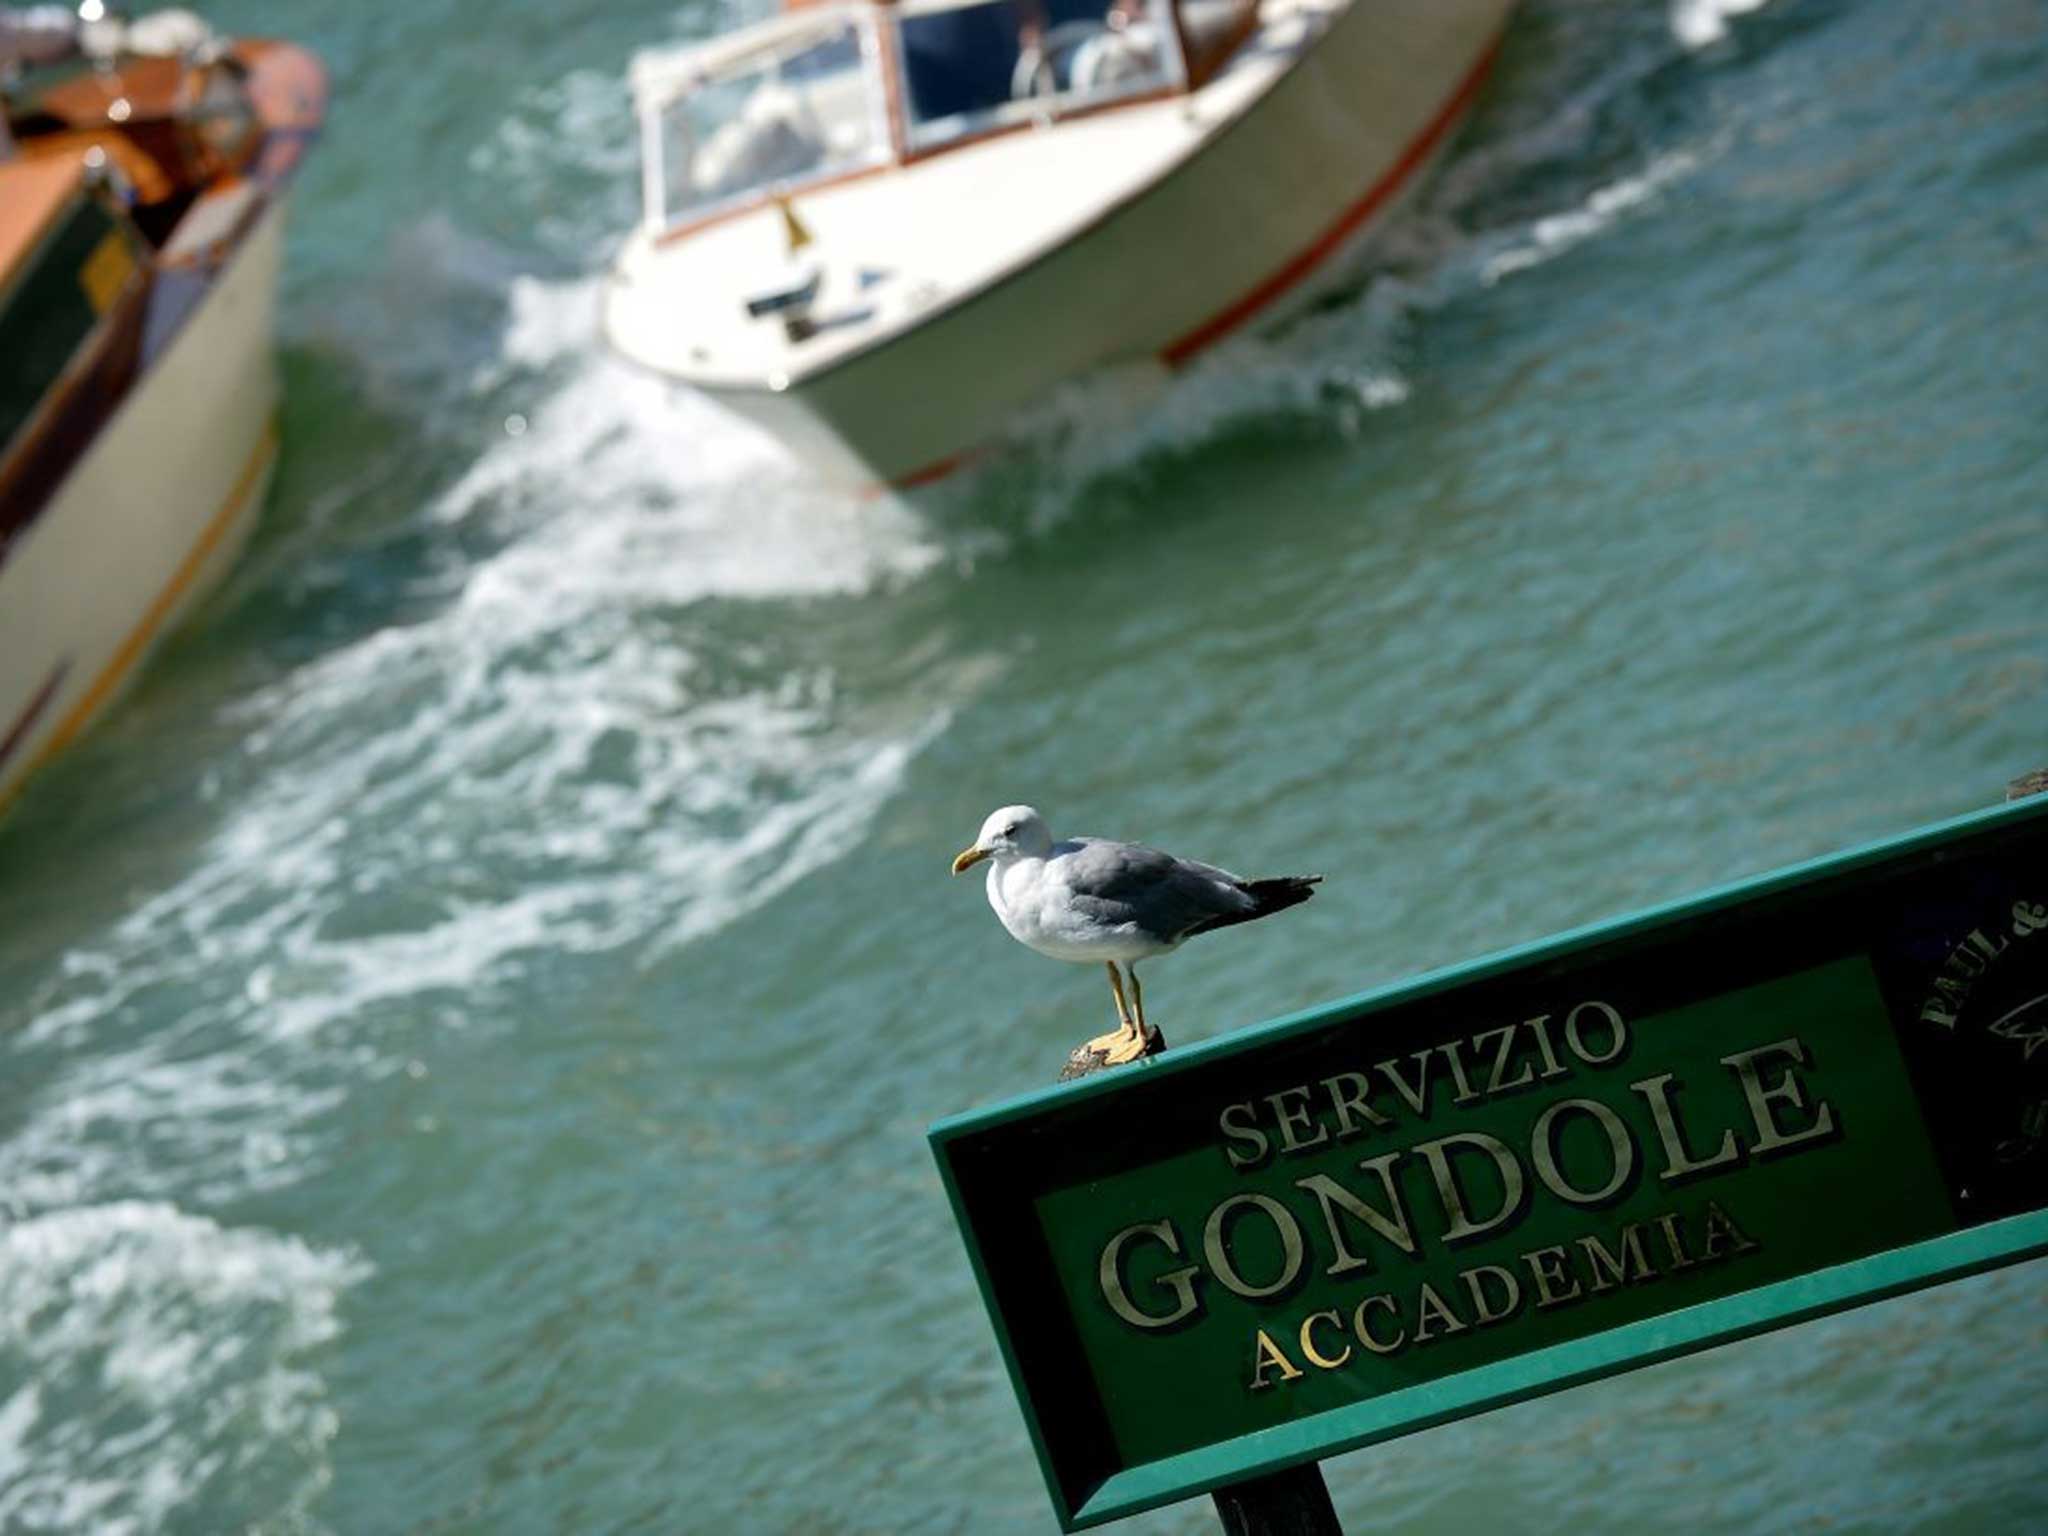 Officials have said they plan to remove seagulls’ nests from central Venice